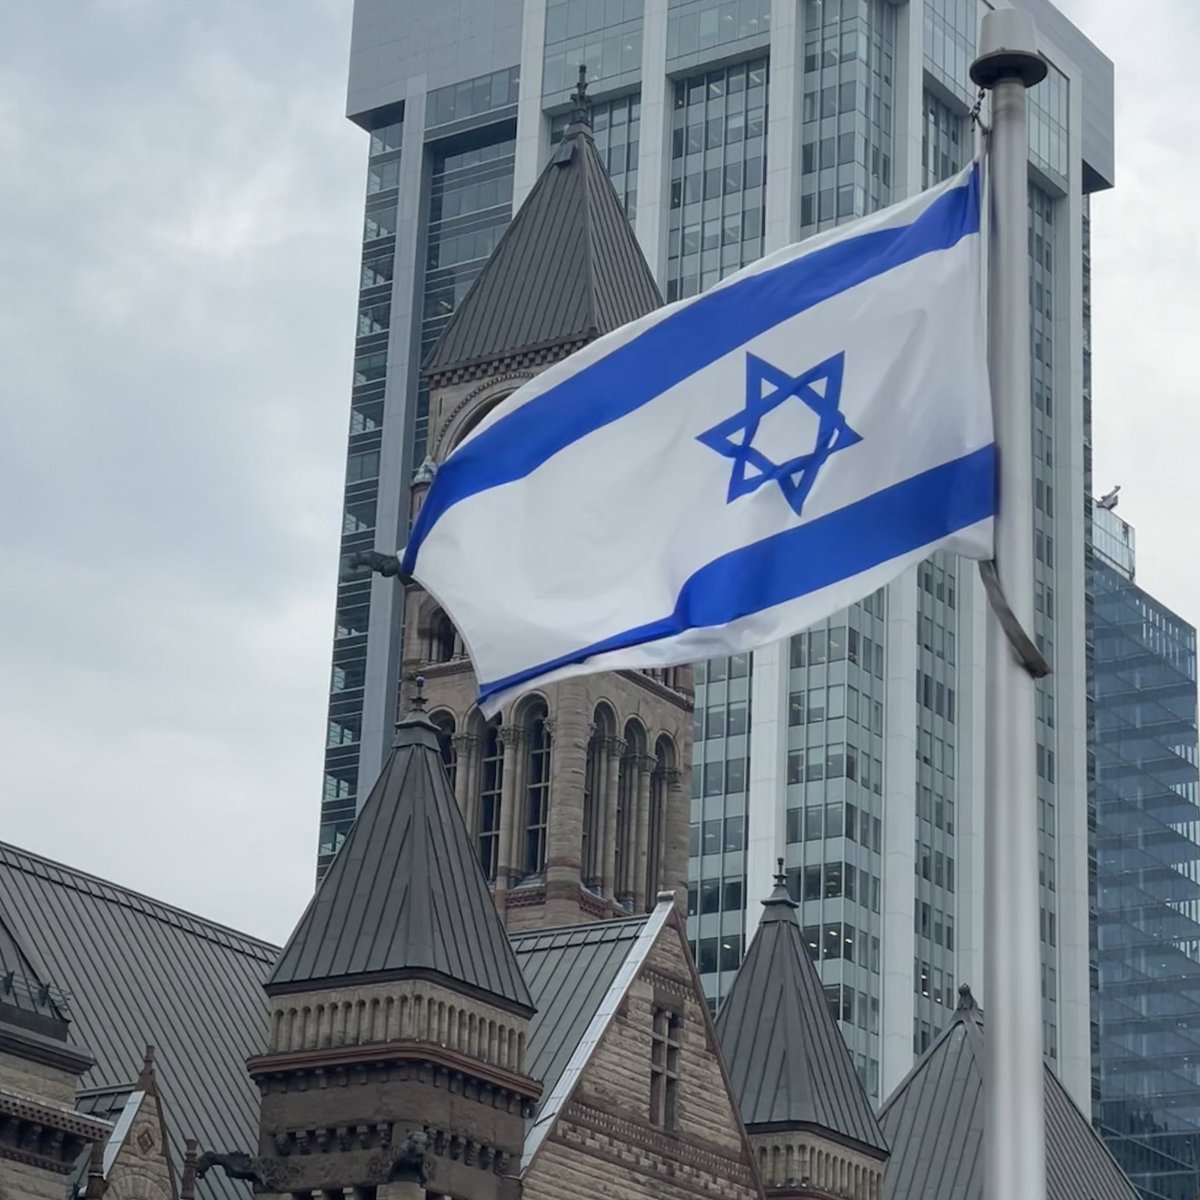 We are grateful for the allyship of @cityoftoronto elected officials @PasternakTO , @MikeColleTo , @McKelvieTO , @DianneSaxe , @FrancesNunziata and @BradMBradford who joined members of the Jewish community in commemorating the founding of the modern State of #Israel at a…